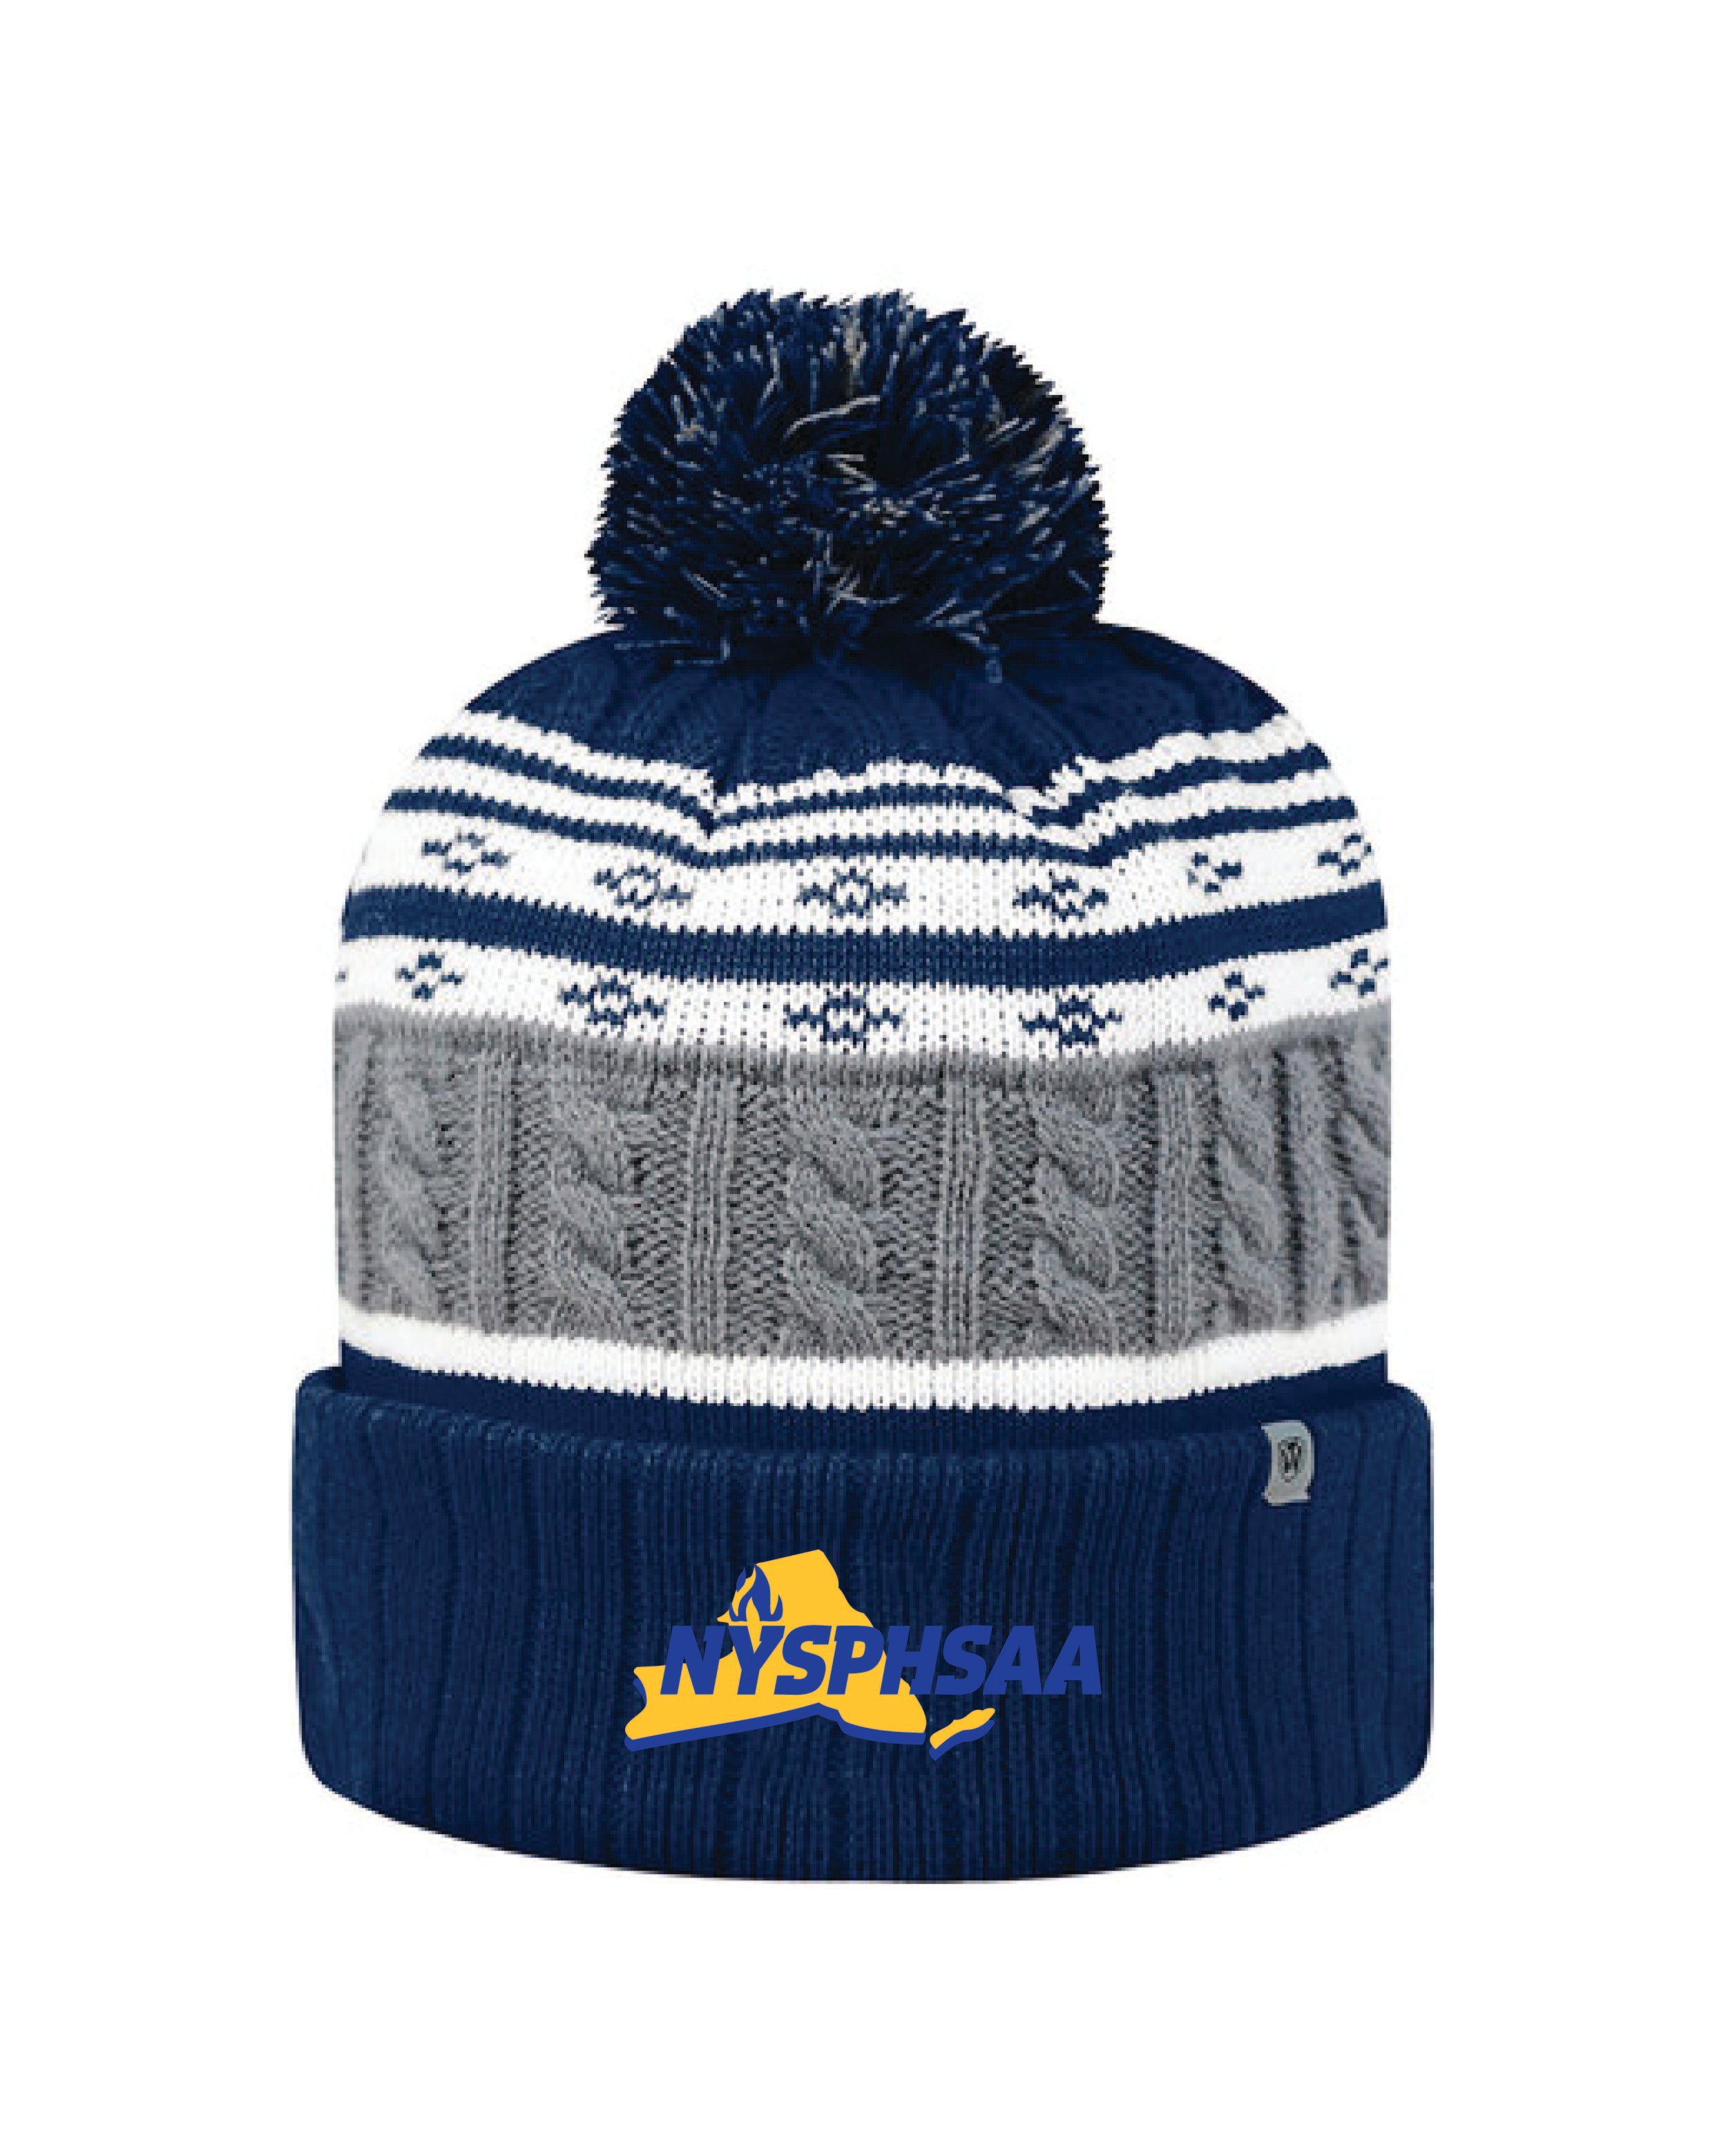 Section VII Branded Adult Knit Cap